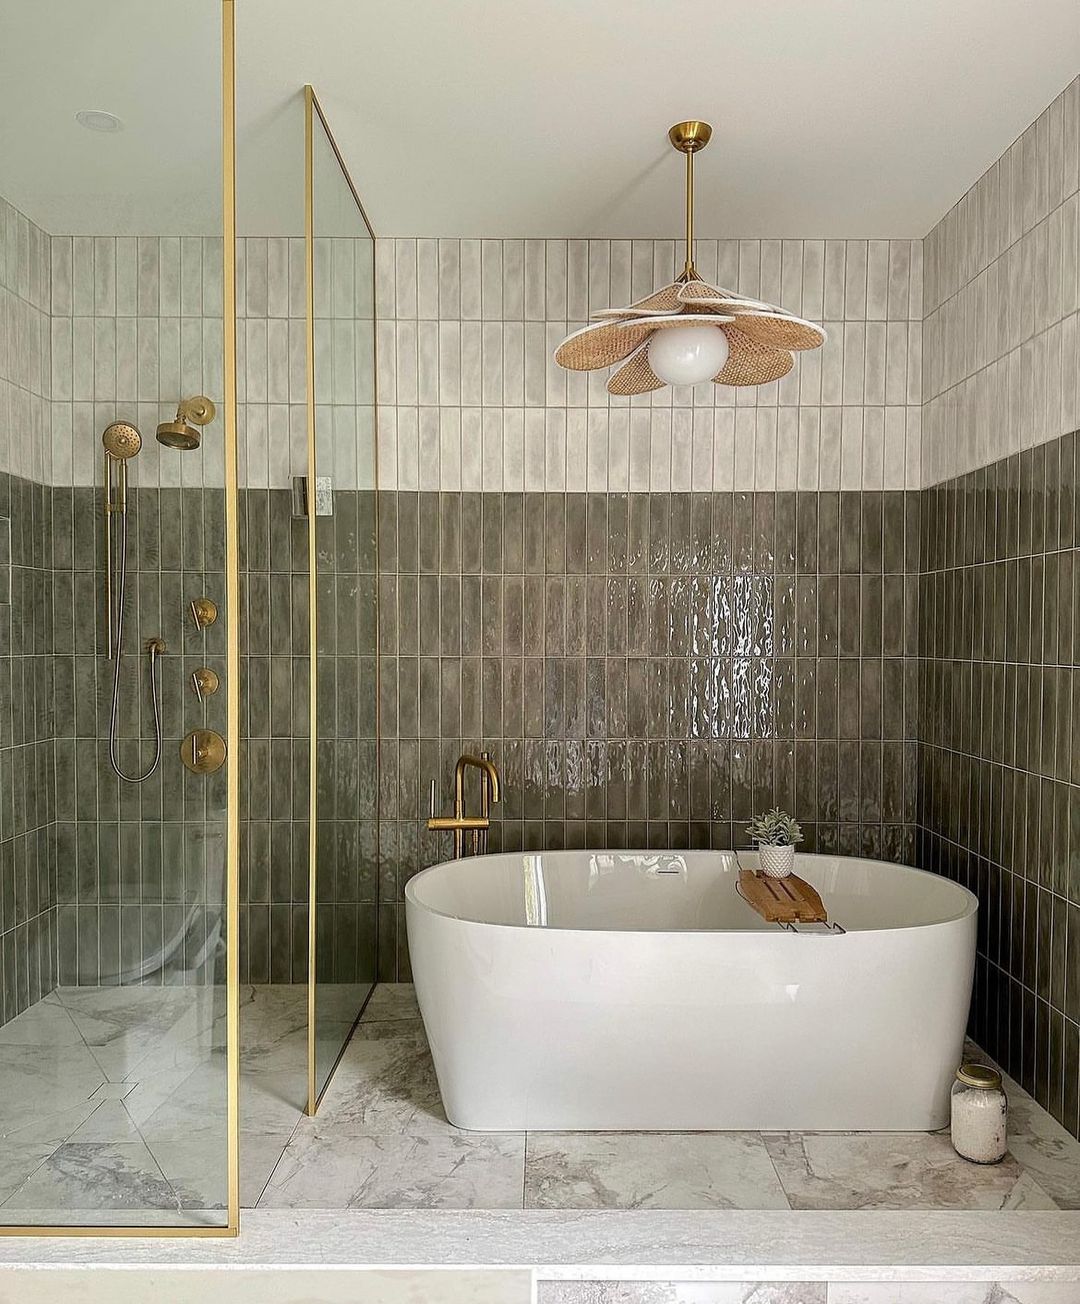 Elegant Contrast with Dark Tiles and Gold Fixtures